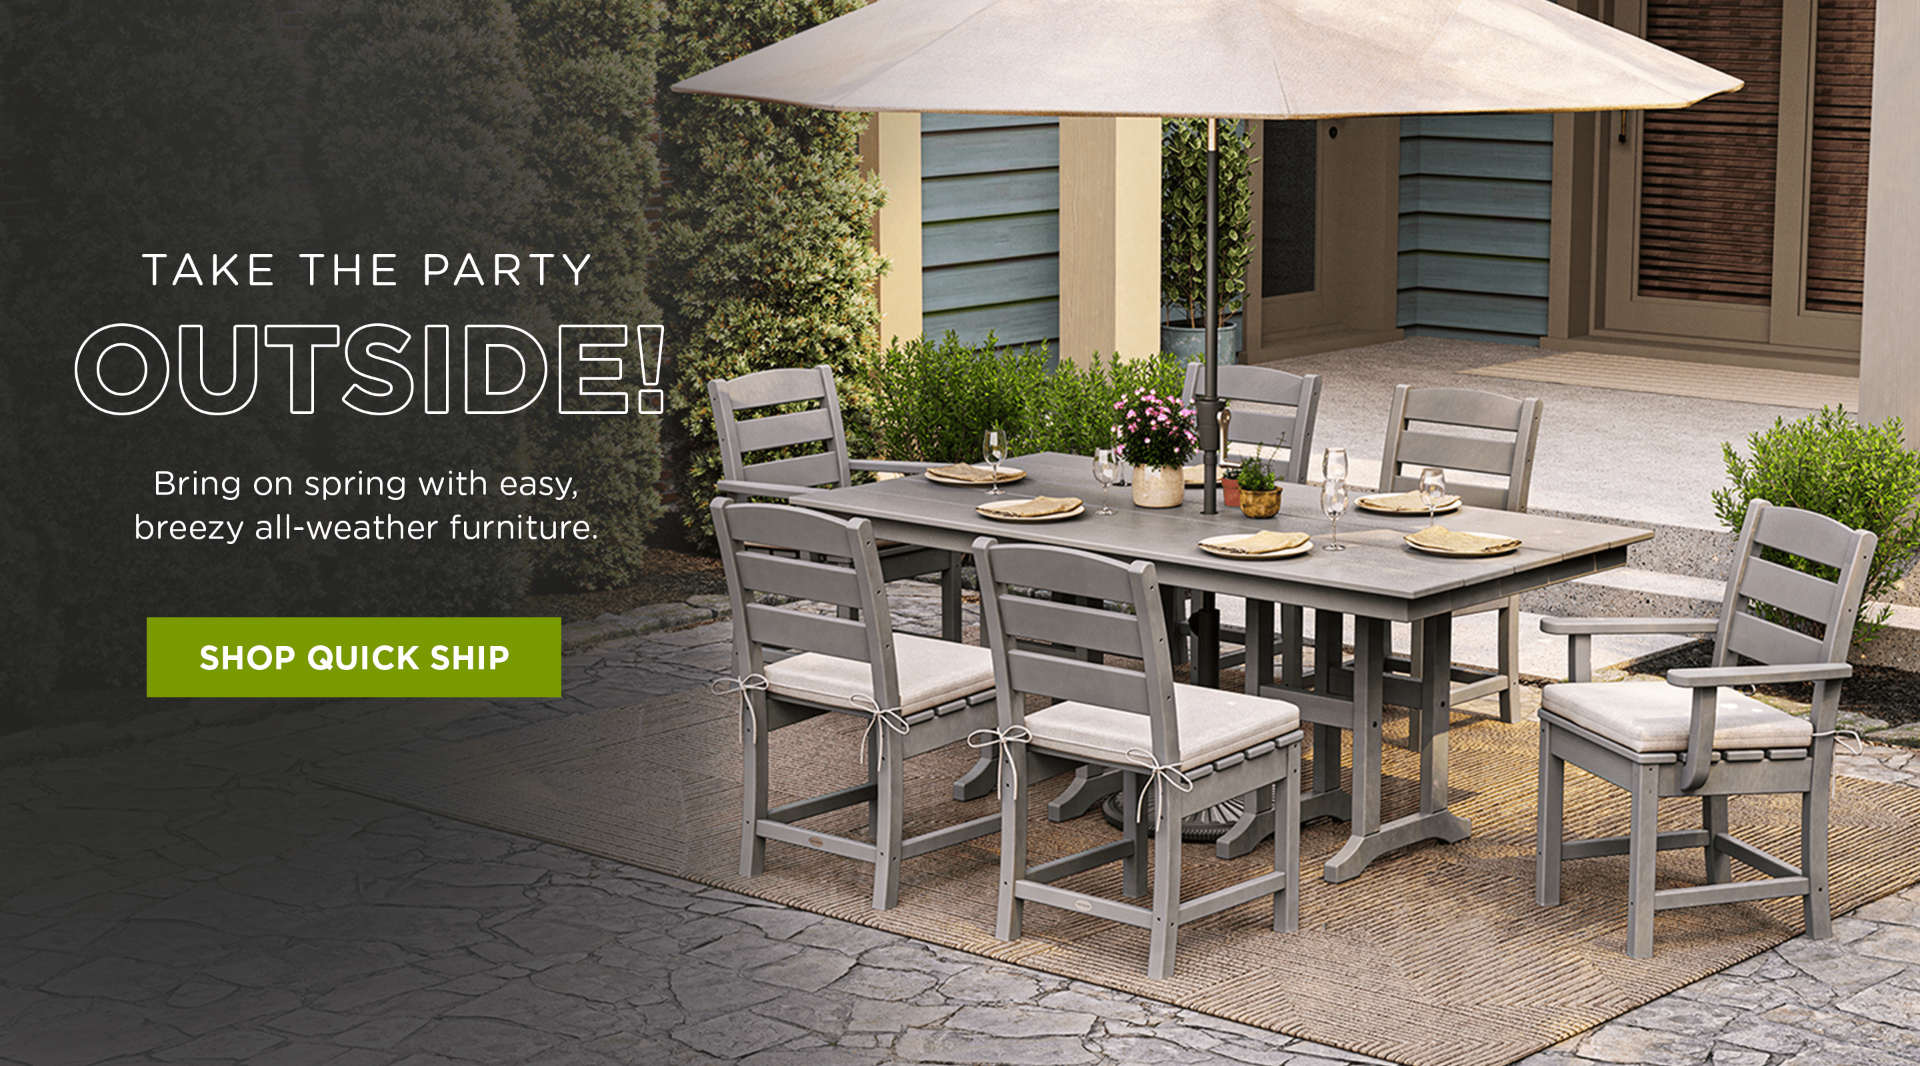 Take the Party Outside!